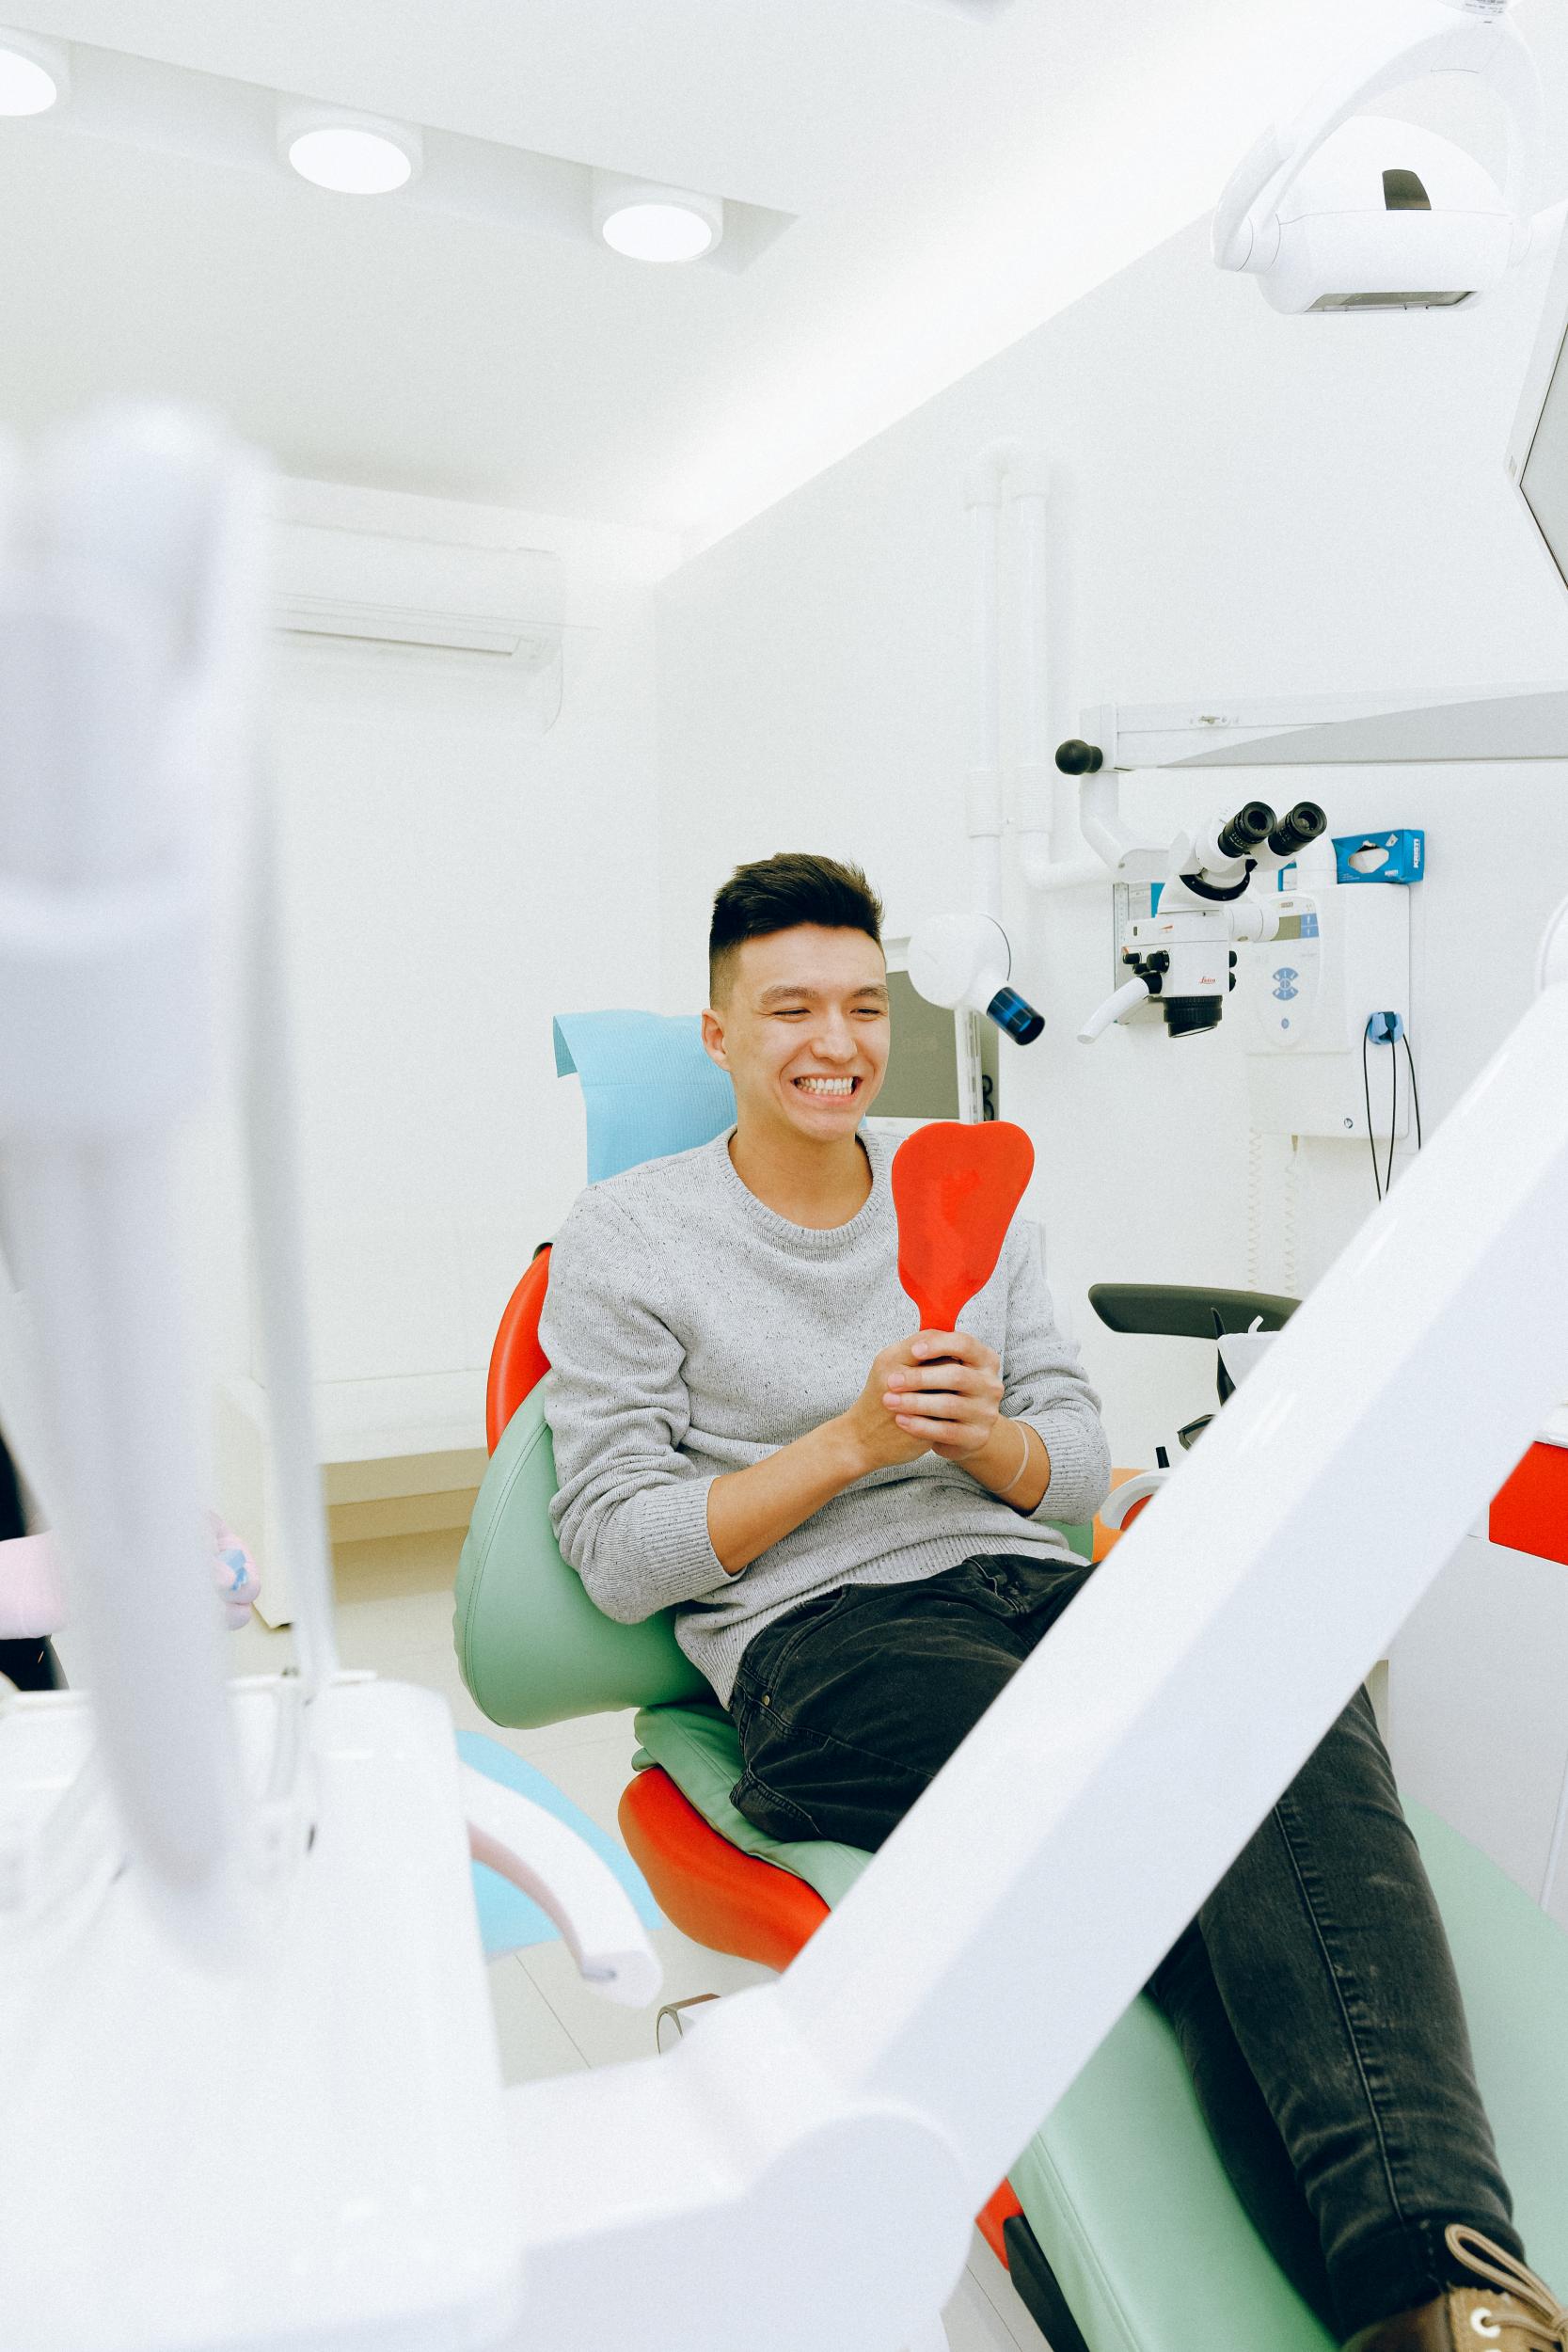 Looking For A Family Dentist In Or Near Santa Monica? Contact This Dental Clinic